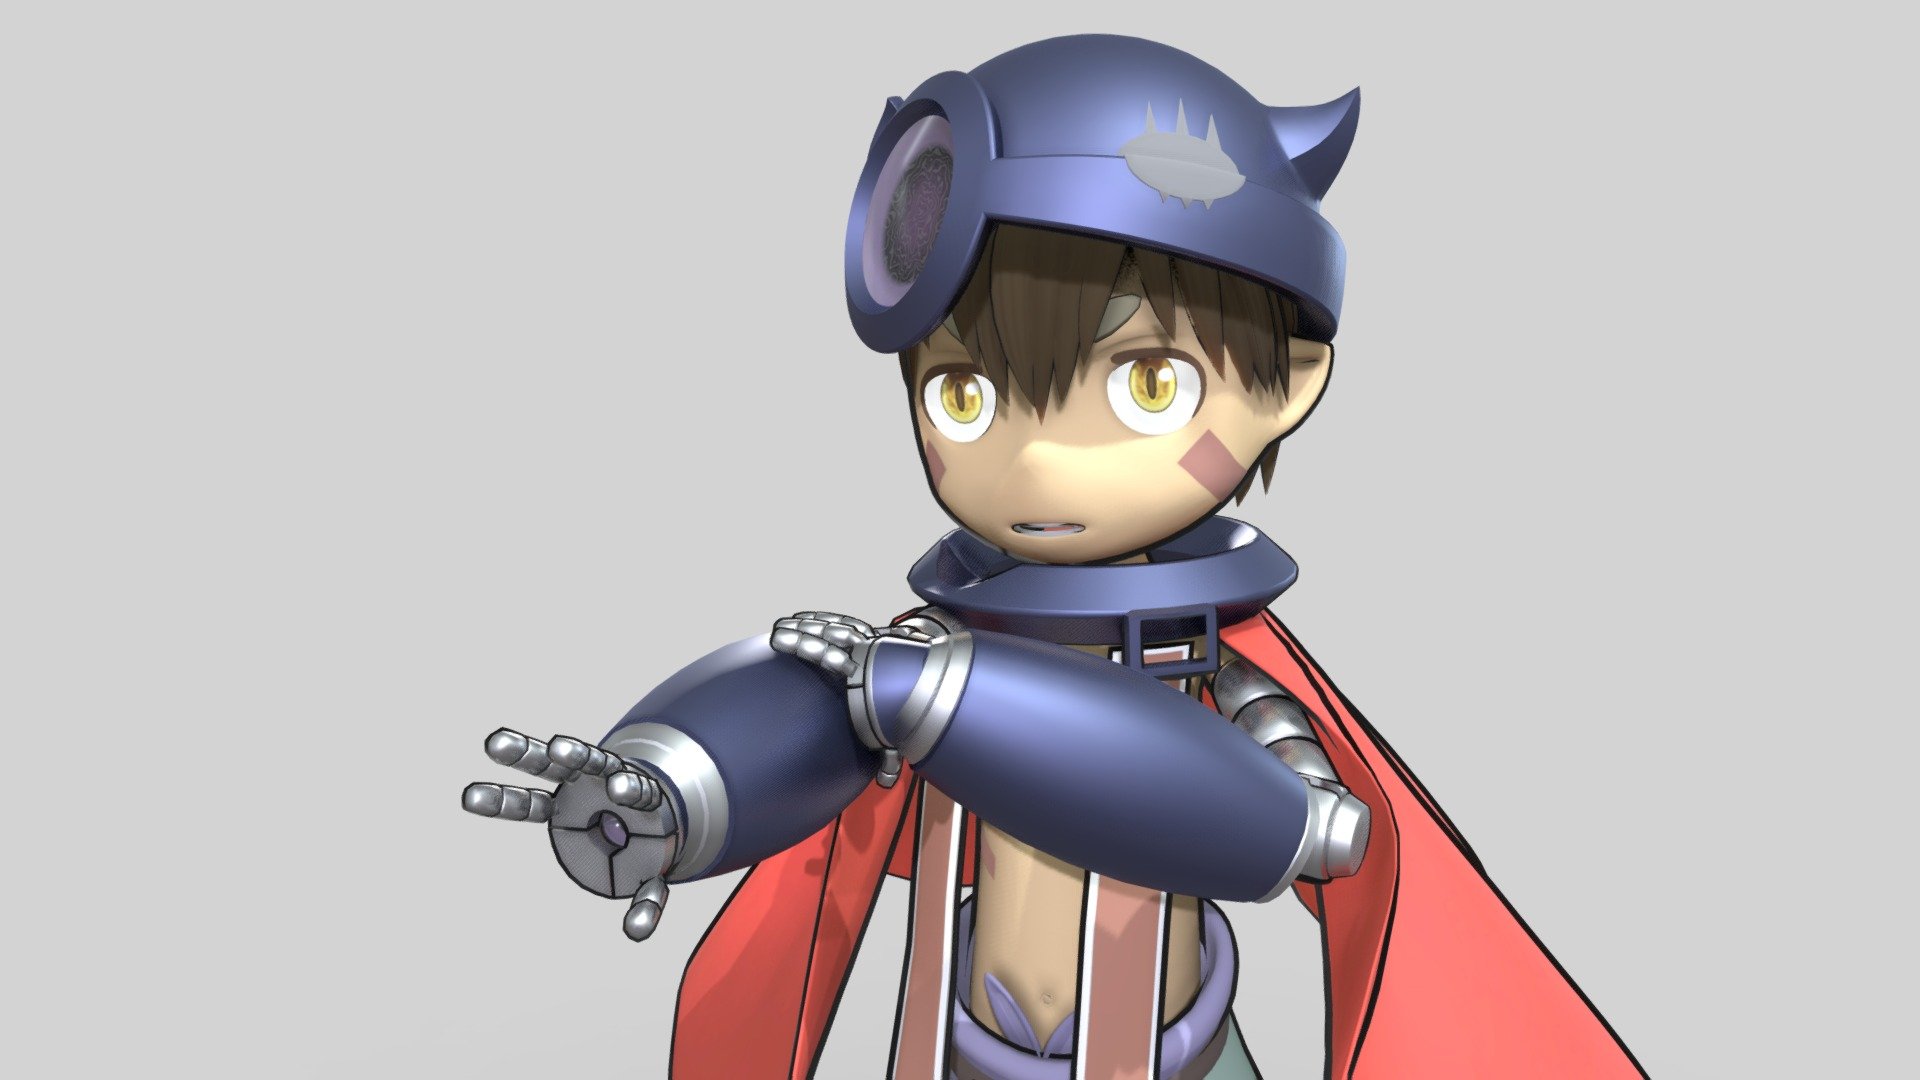 reg-from-made-in-abyss-3d-model-by-veynam-6924e19-sketchfab